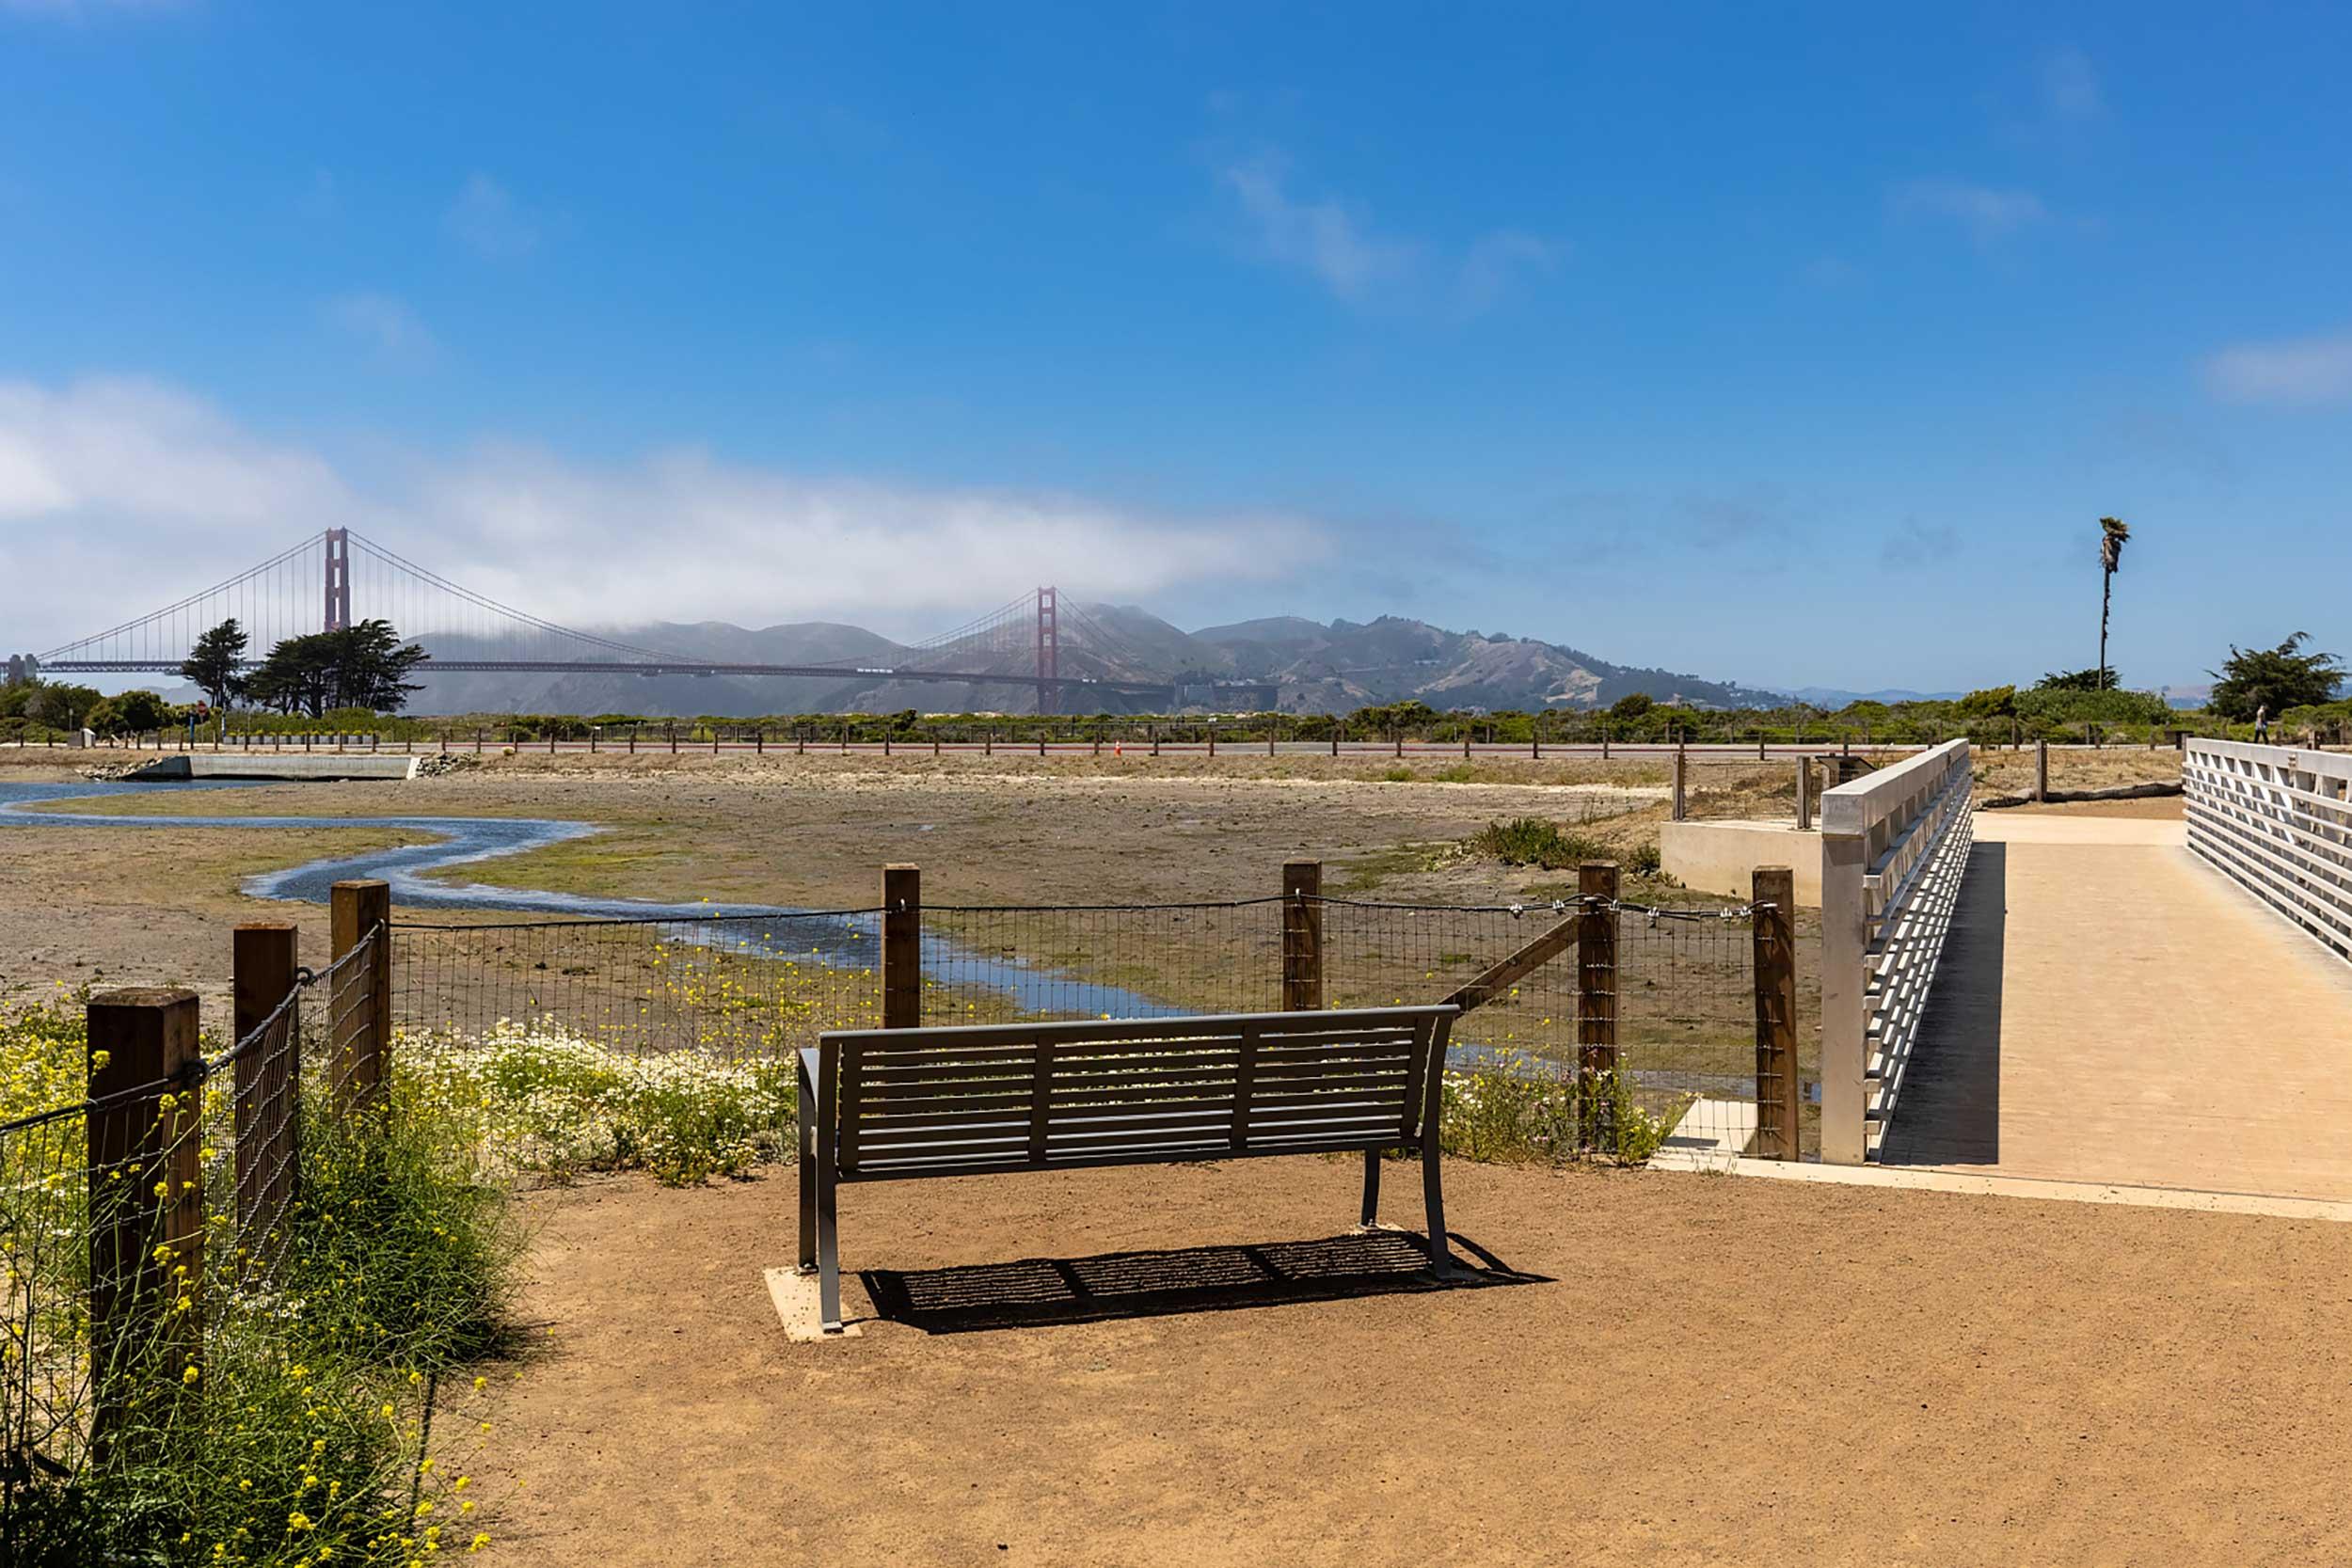 Quartermaster Reach Marsh in the Presidio with a bench and pedestrian bridge. Photo by Charity Vargas.